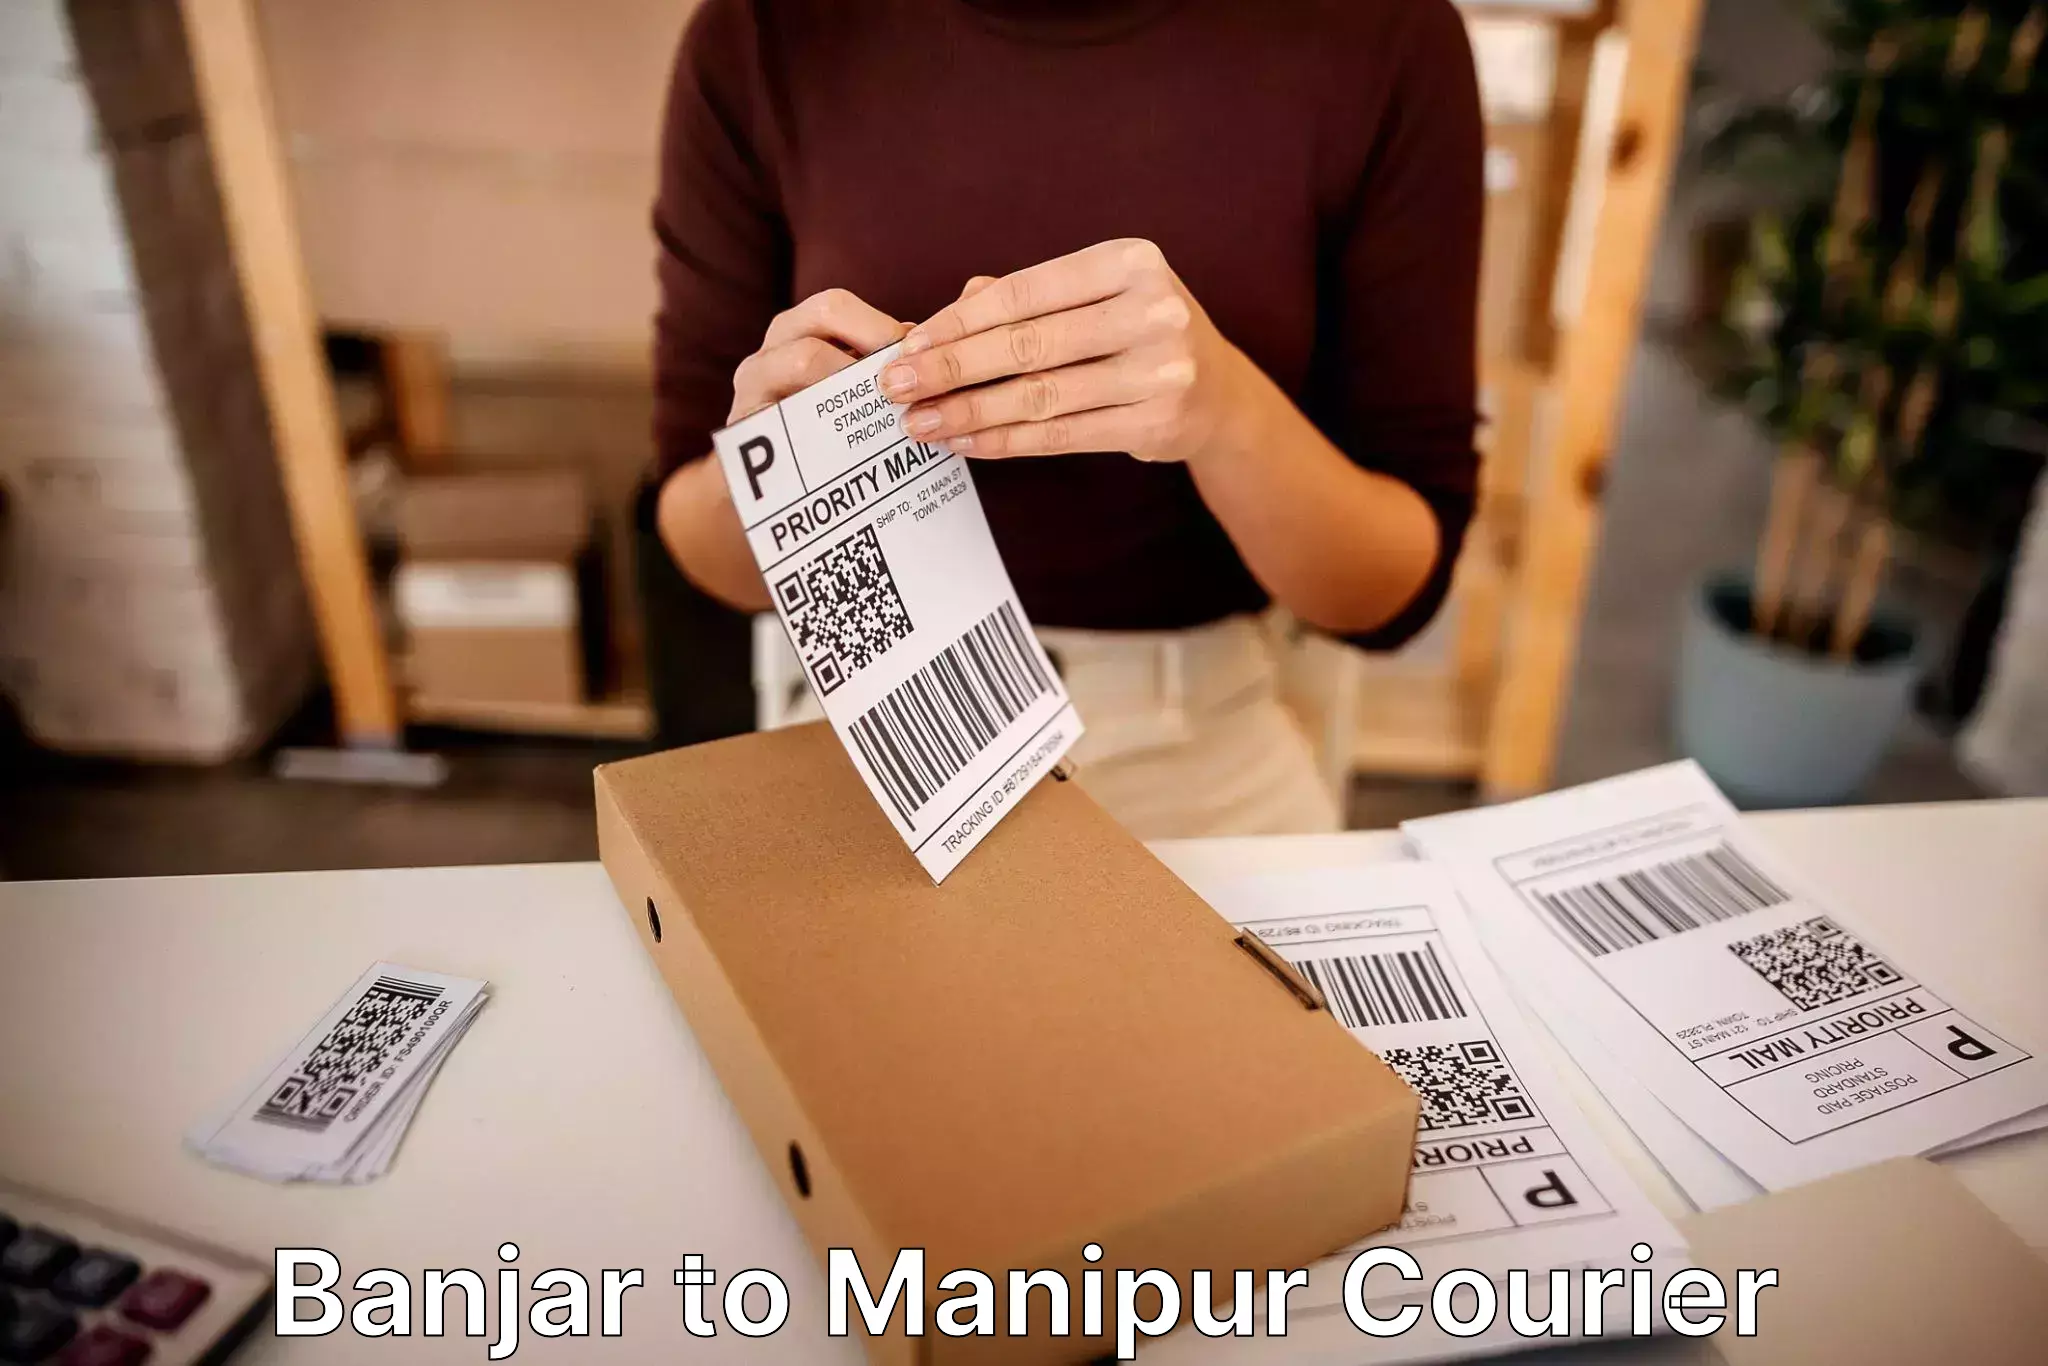 Hassle-free relocation Banjar to Manipur